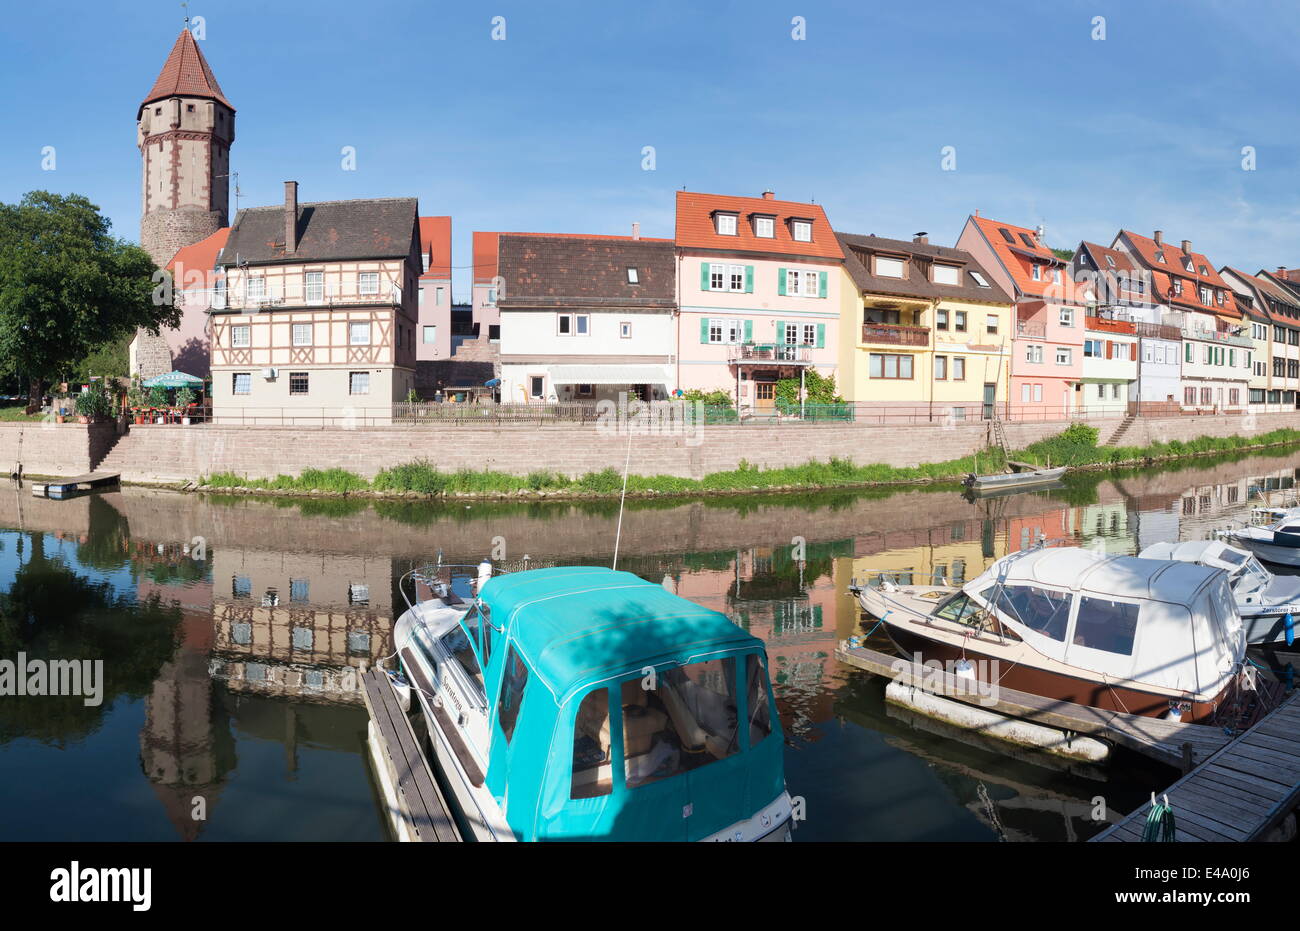 Spitzer Turm Tower, Tauber River, old town of Wertheim, Main Tauber District, Baden Wurttemberg, Germany, Europe Stock Photo